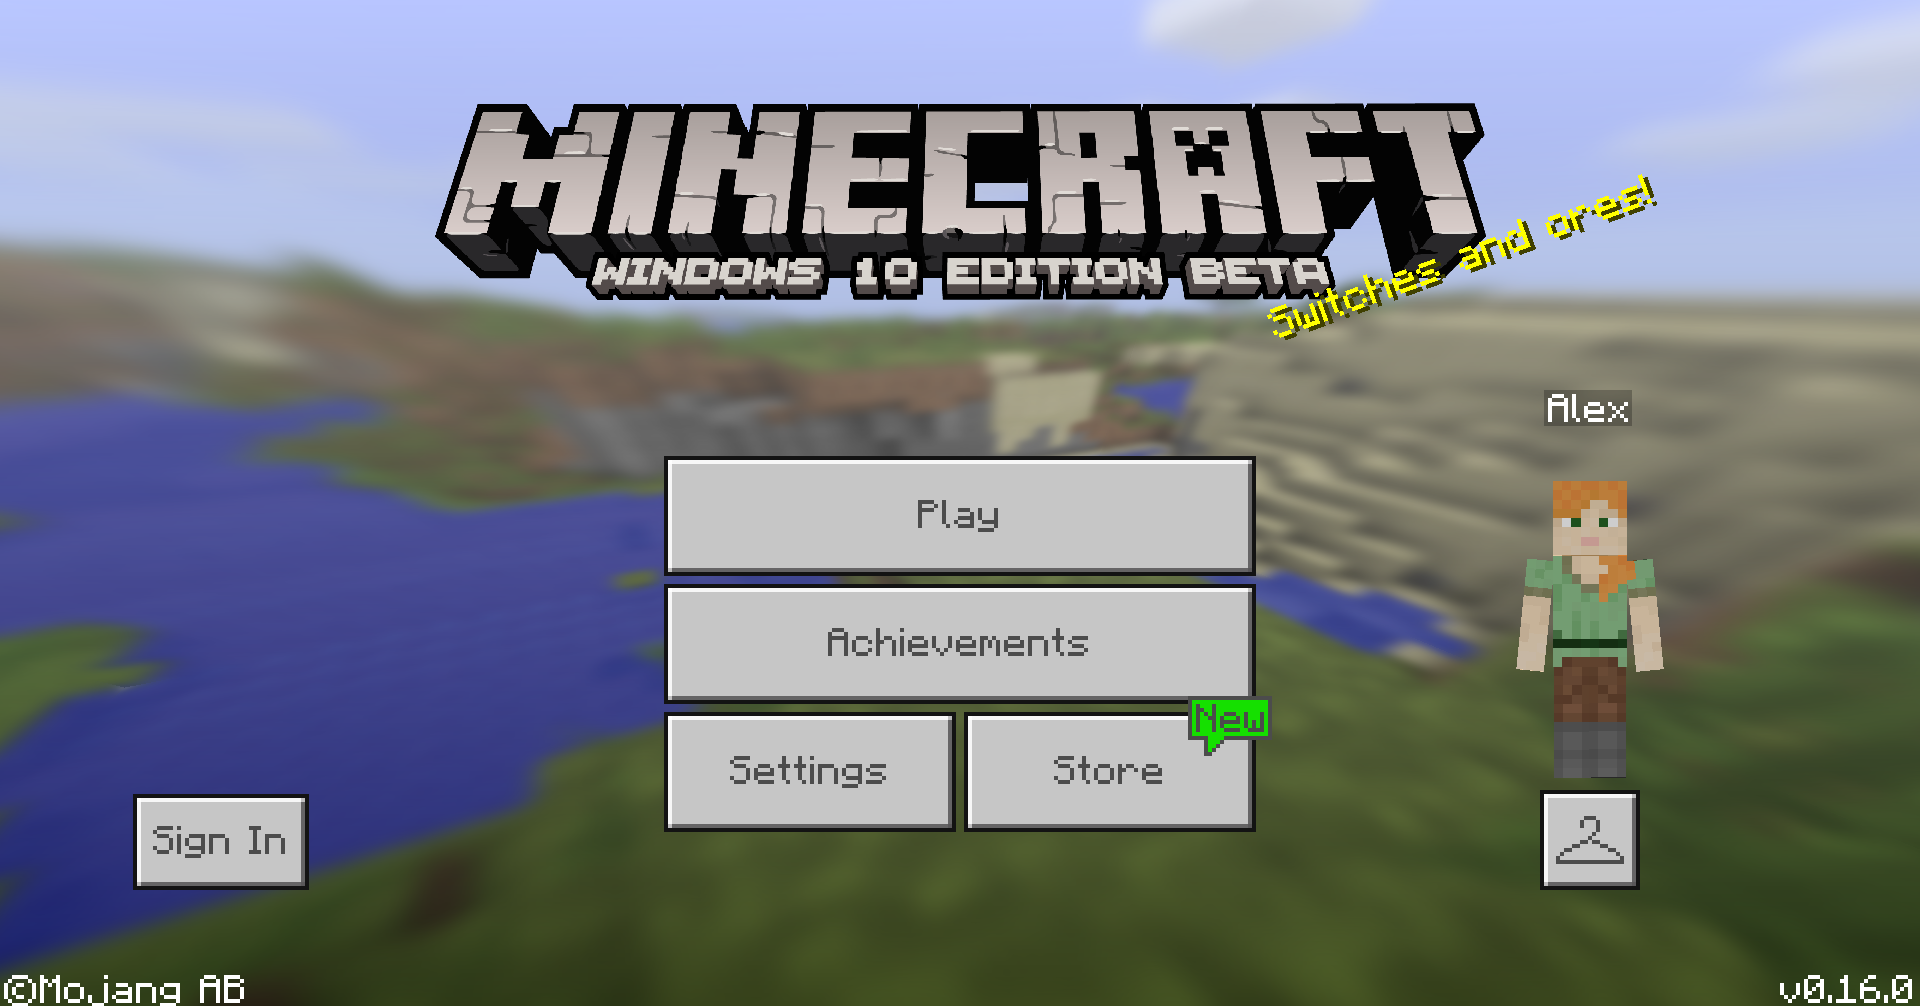 How to Download the Latest Minecraft Pocket Edition Beta Version